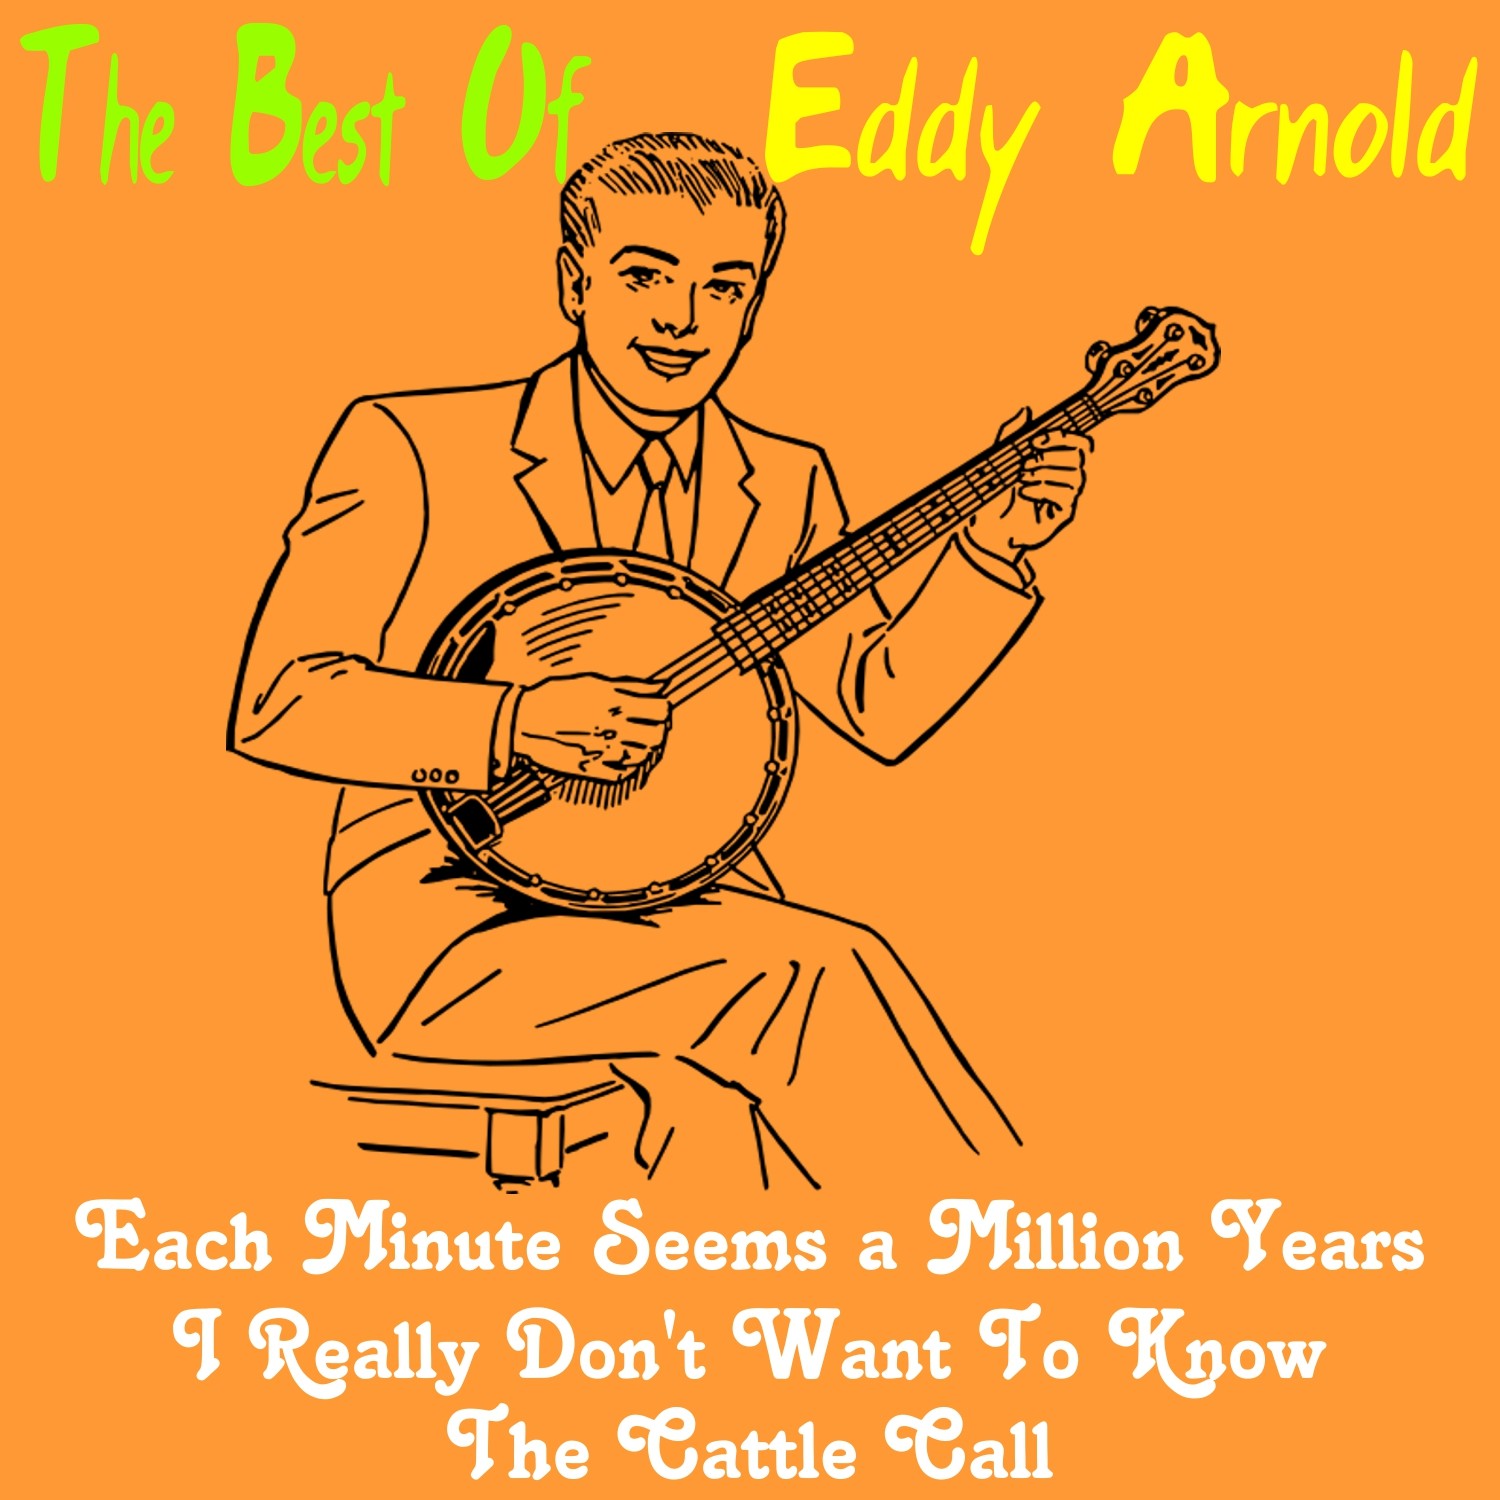 The Best of Eddy Arnold